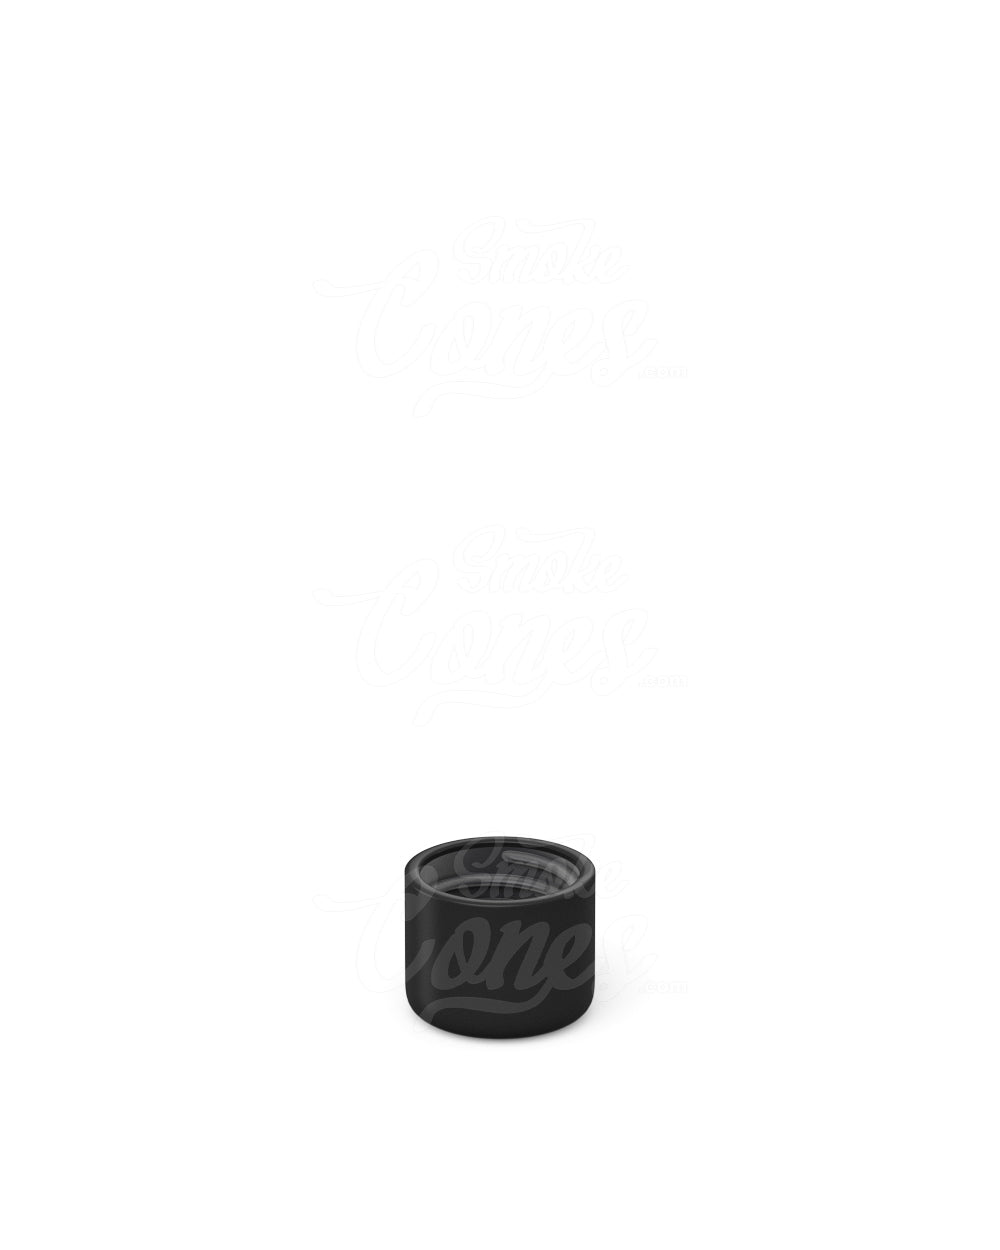 18mm Matte Black Smooth Push and Turn Dome Plastic CR Caps For Glass Tubes w/ Foam Liner 400/Box - 4